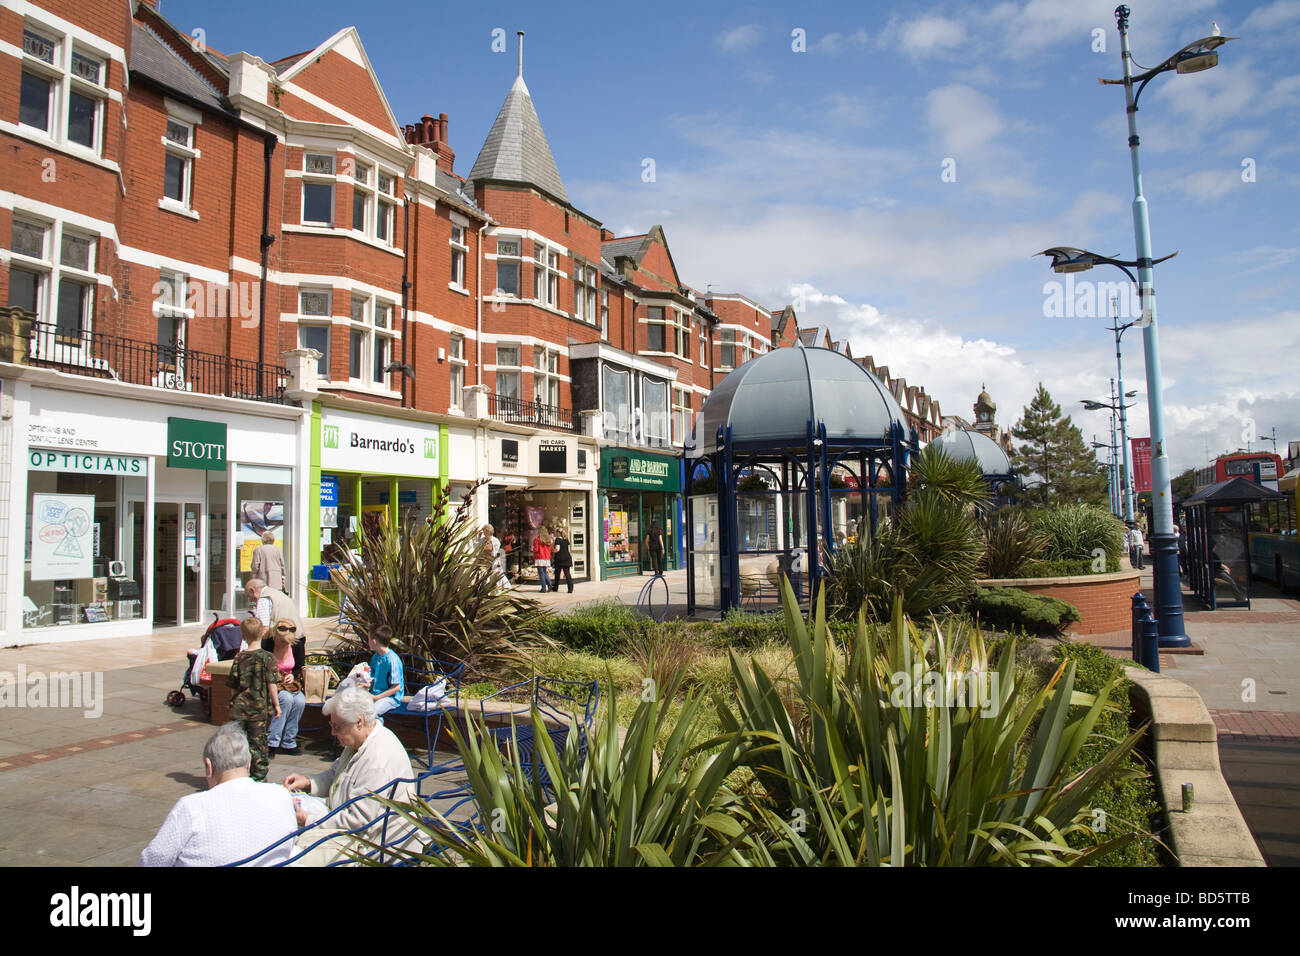 Lytham St Annes Lancashire England EU People sitting out in the sunshine on seats along Sty Annes Street West in front of shops Stock Photo